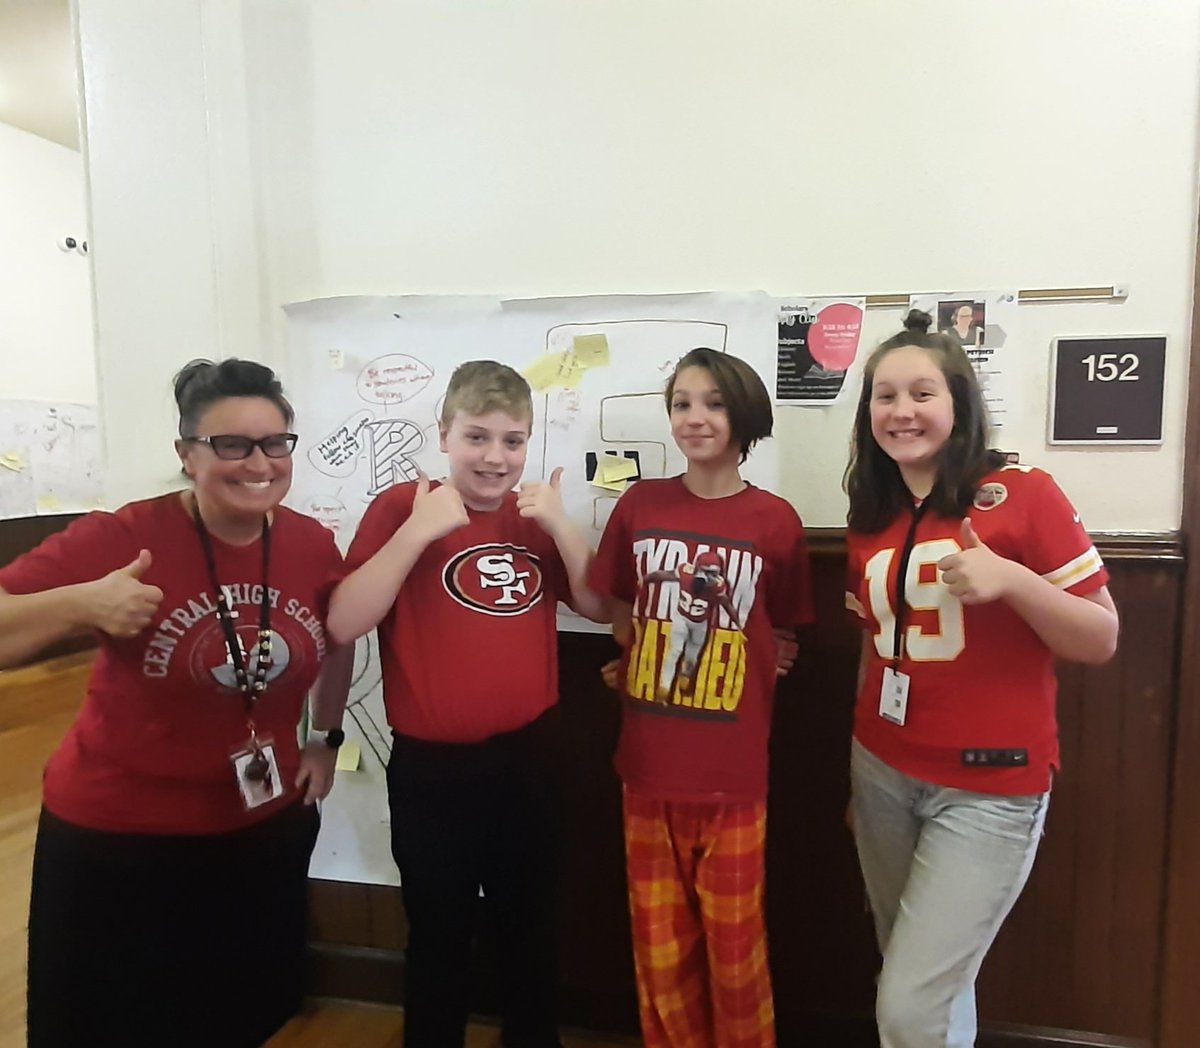 #TeamSPS a couple Scholars ss, and me, wearing red today - Go Teams! @CentralBulldog @PhelpsCenter